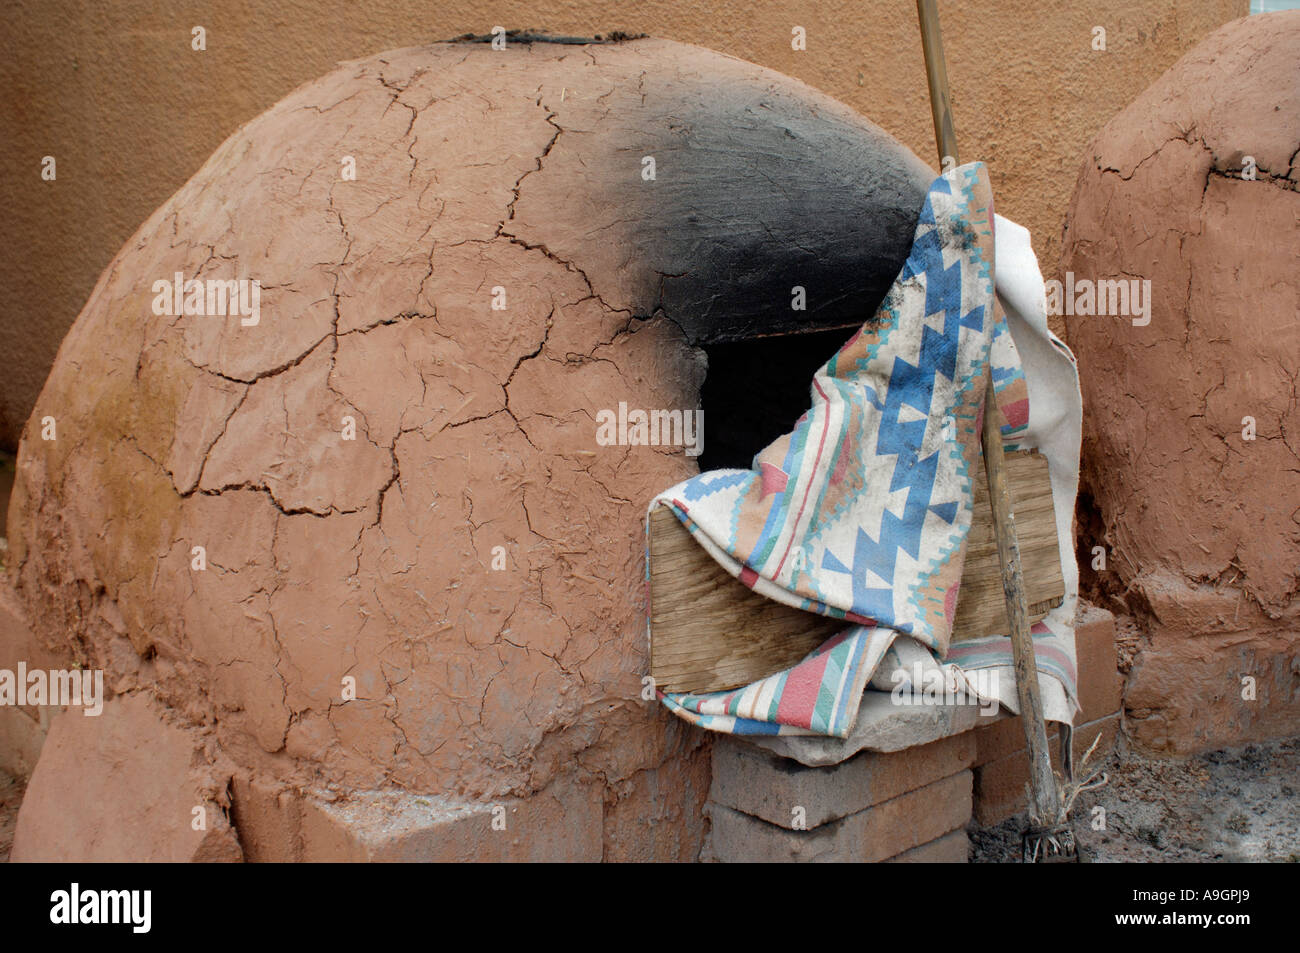 Bread baking in a Zuni Pueblo horno at the Intertribal Ceremonial in Gallup New Mexico. Digital photograph Stock Photo